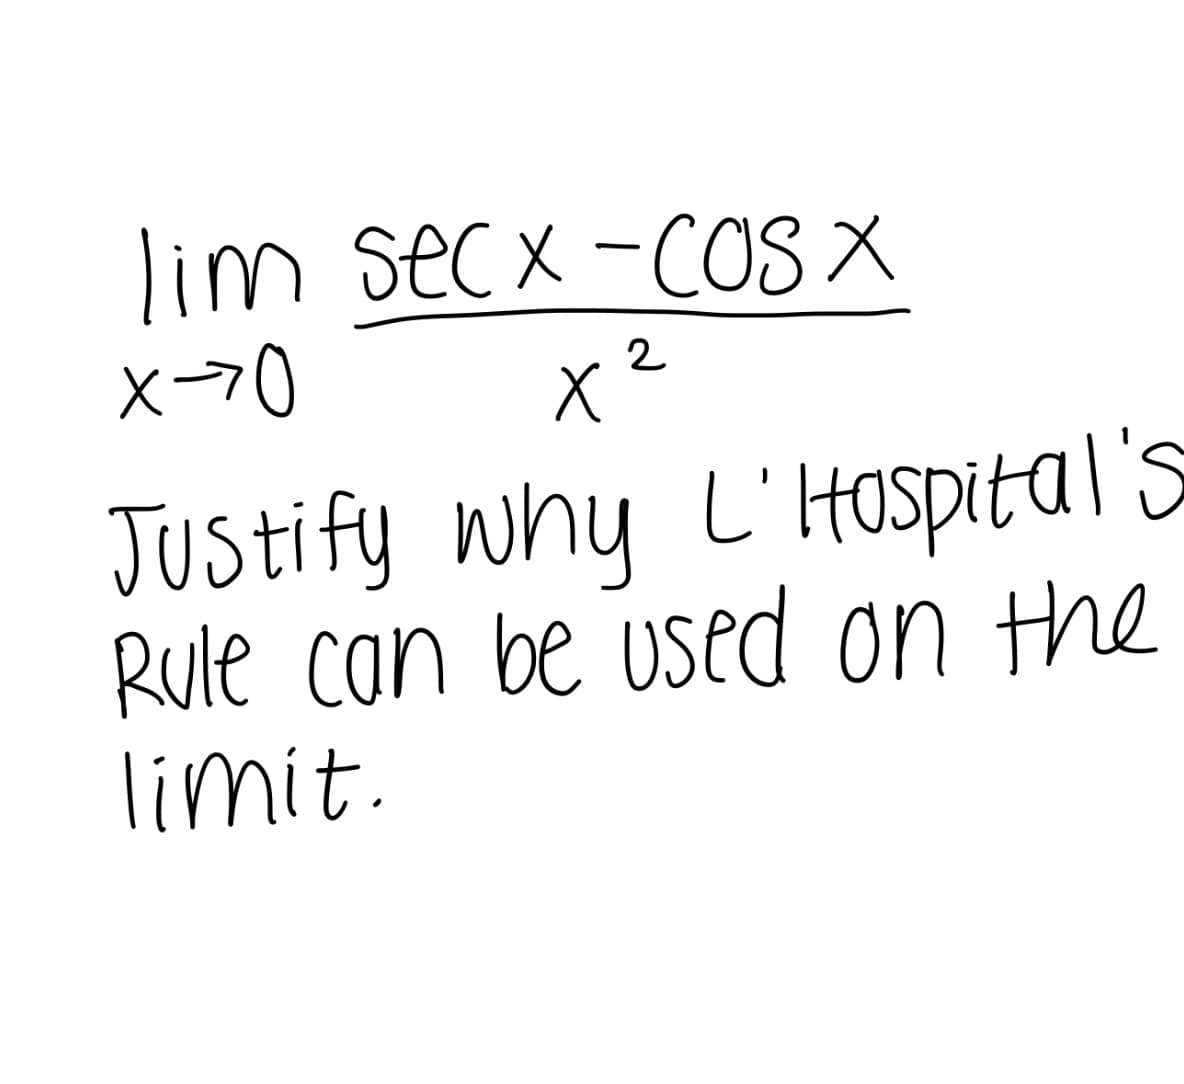 lim sec x -COS X
x-70
2
Justify why L'Hospital's
Rule can be used on the
limit.
